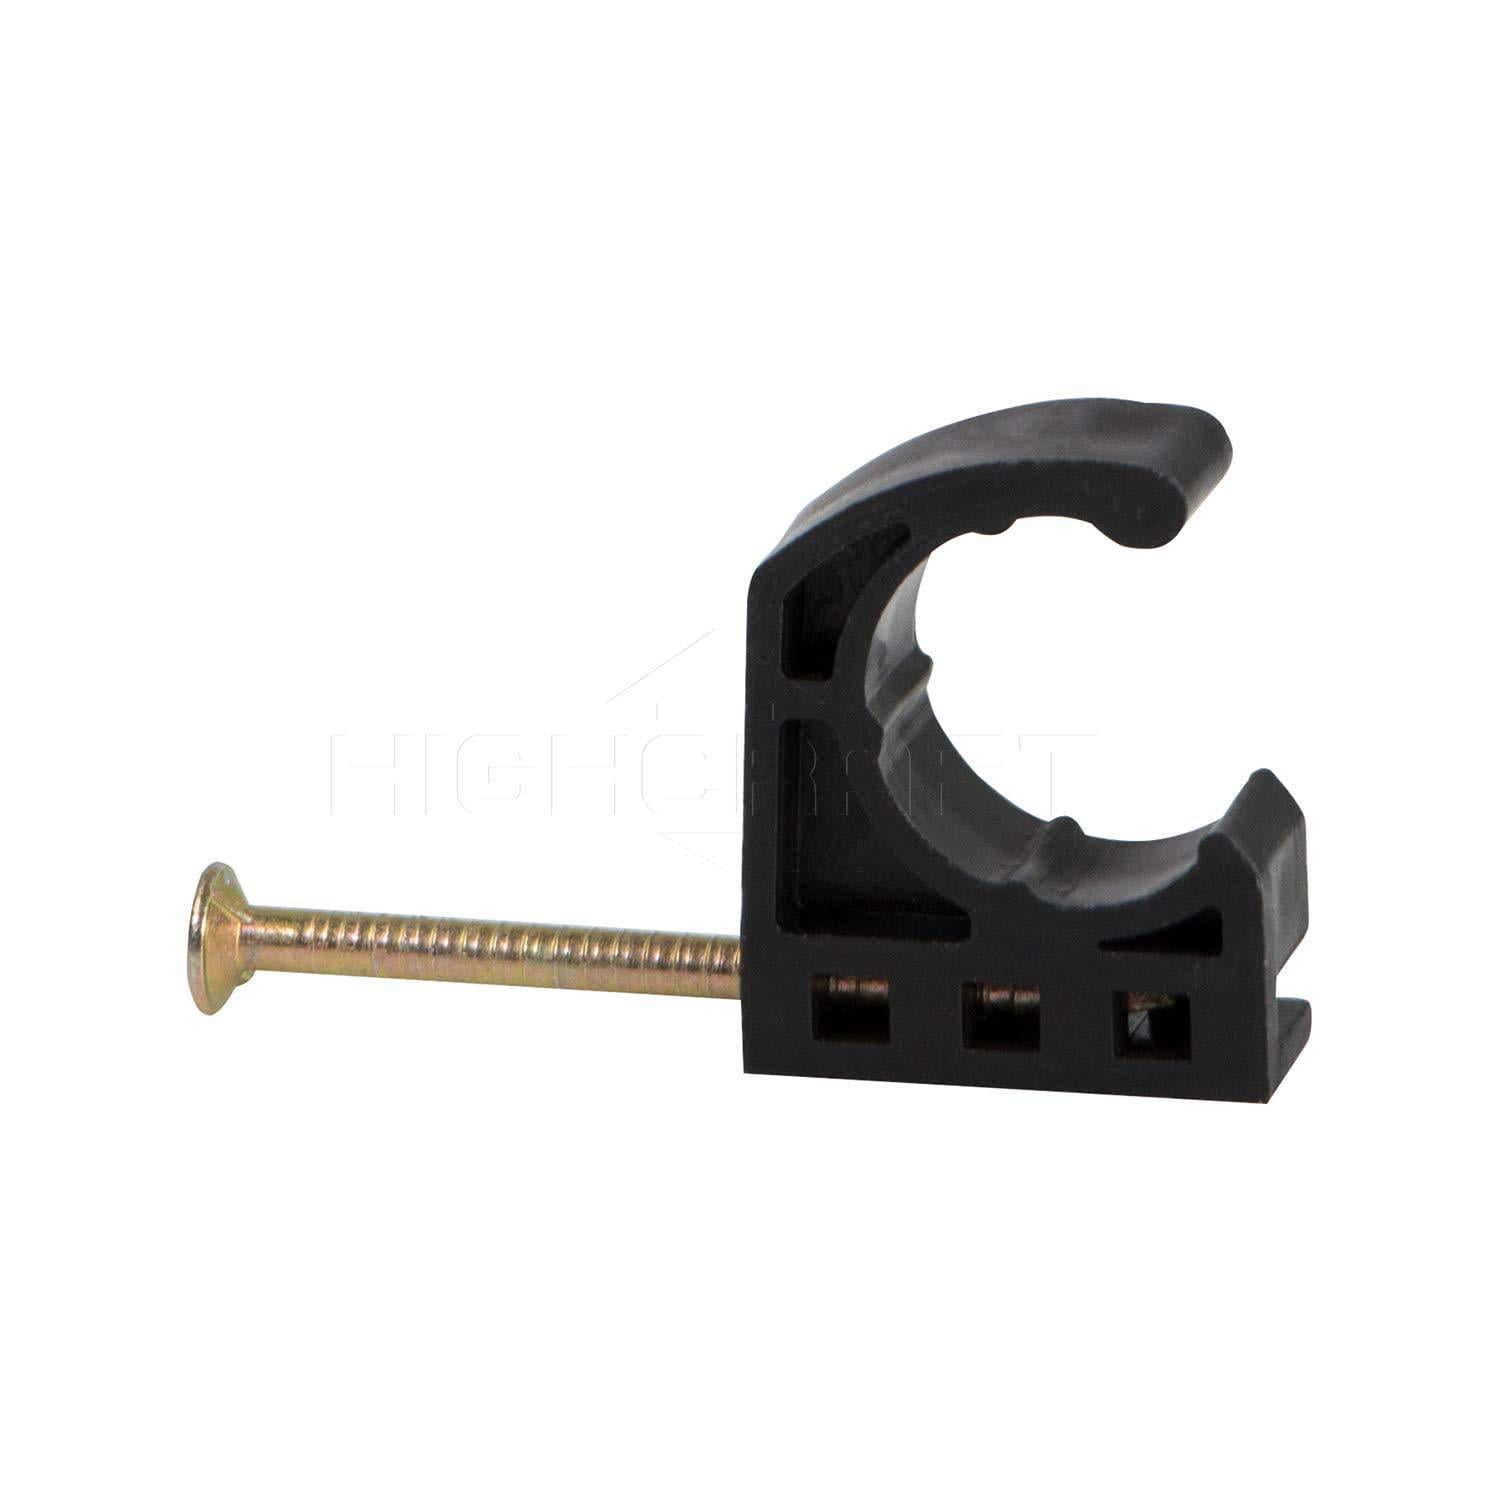 Everflow HC012 Half Clamp J-hook With Nail for PEX Tubing Pipe Support Hc012x50 for sale online 